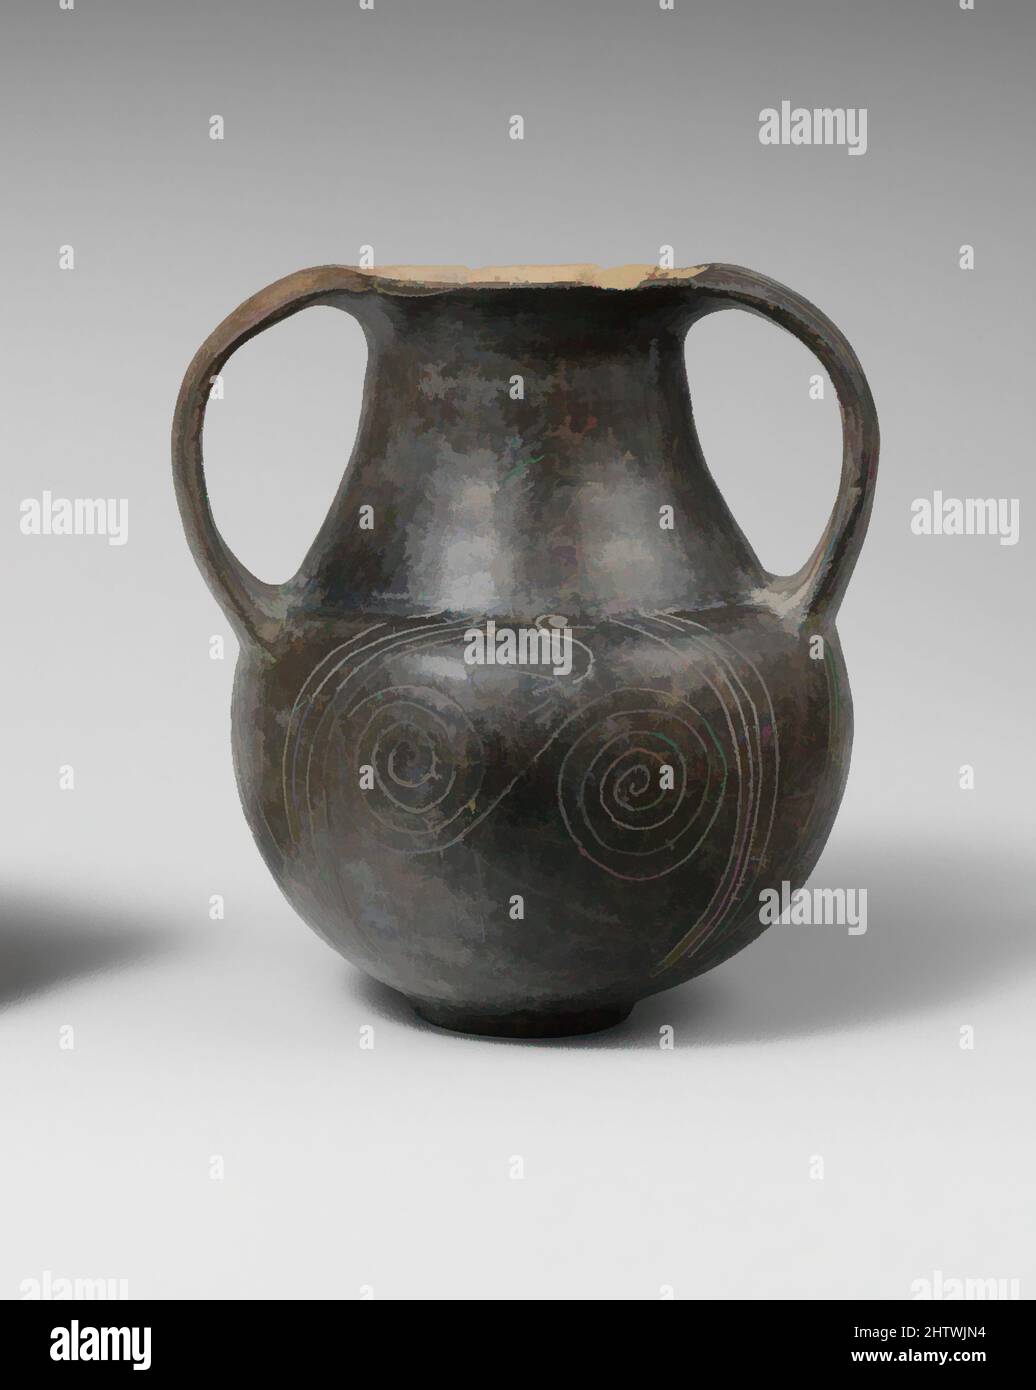 Art inspired by Terracotta spiral amphora (jar), Archaic, ca. 675–650 B.C., Etruscan, Terracotta; bucchero, H. 4 1/4 in. (10.8 cm), Vases, This distinctive shape, frequently incised with double spirals, is indigenous to Italy. The thin, flat handles and sharp curves imply that the, Classic works modernized by Artotop with a splash of modernity. Shapes, color and value, eye-catching visual impact on art. Emotions through freedom of artworks in a contemporary way. A timeless message pursuing a wildly creative new direction. Artists turning to the digital medium and creating the Artotop NFT Stock Photo